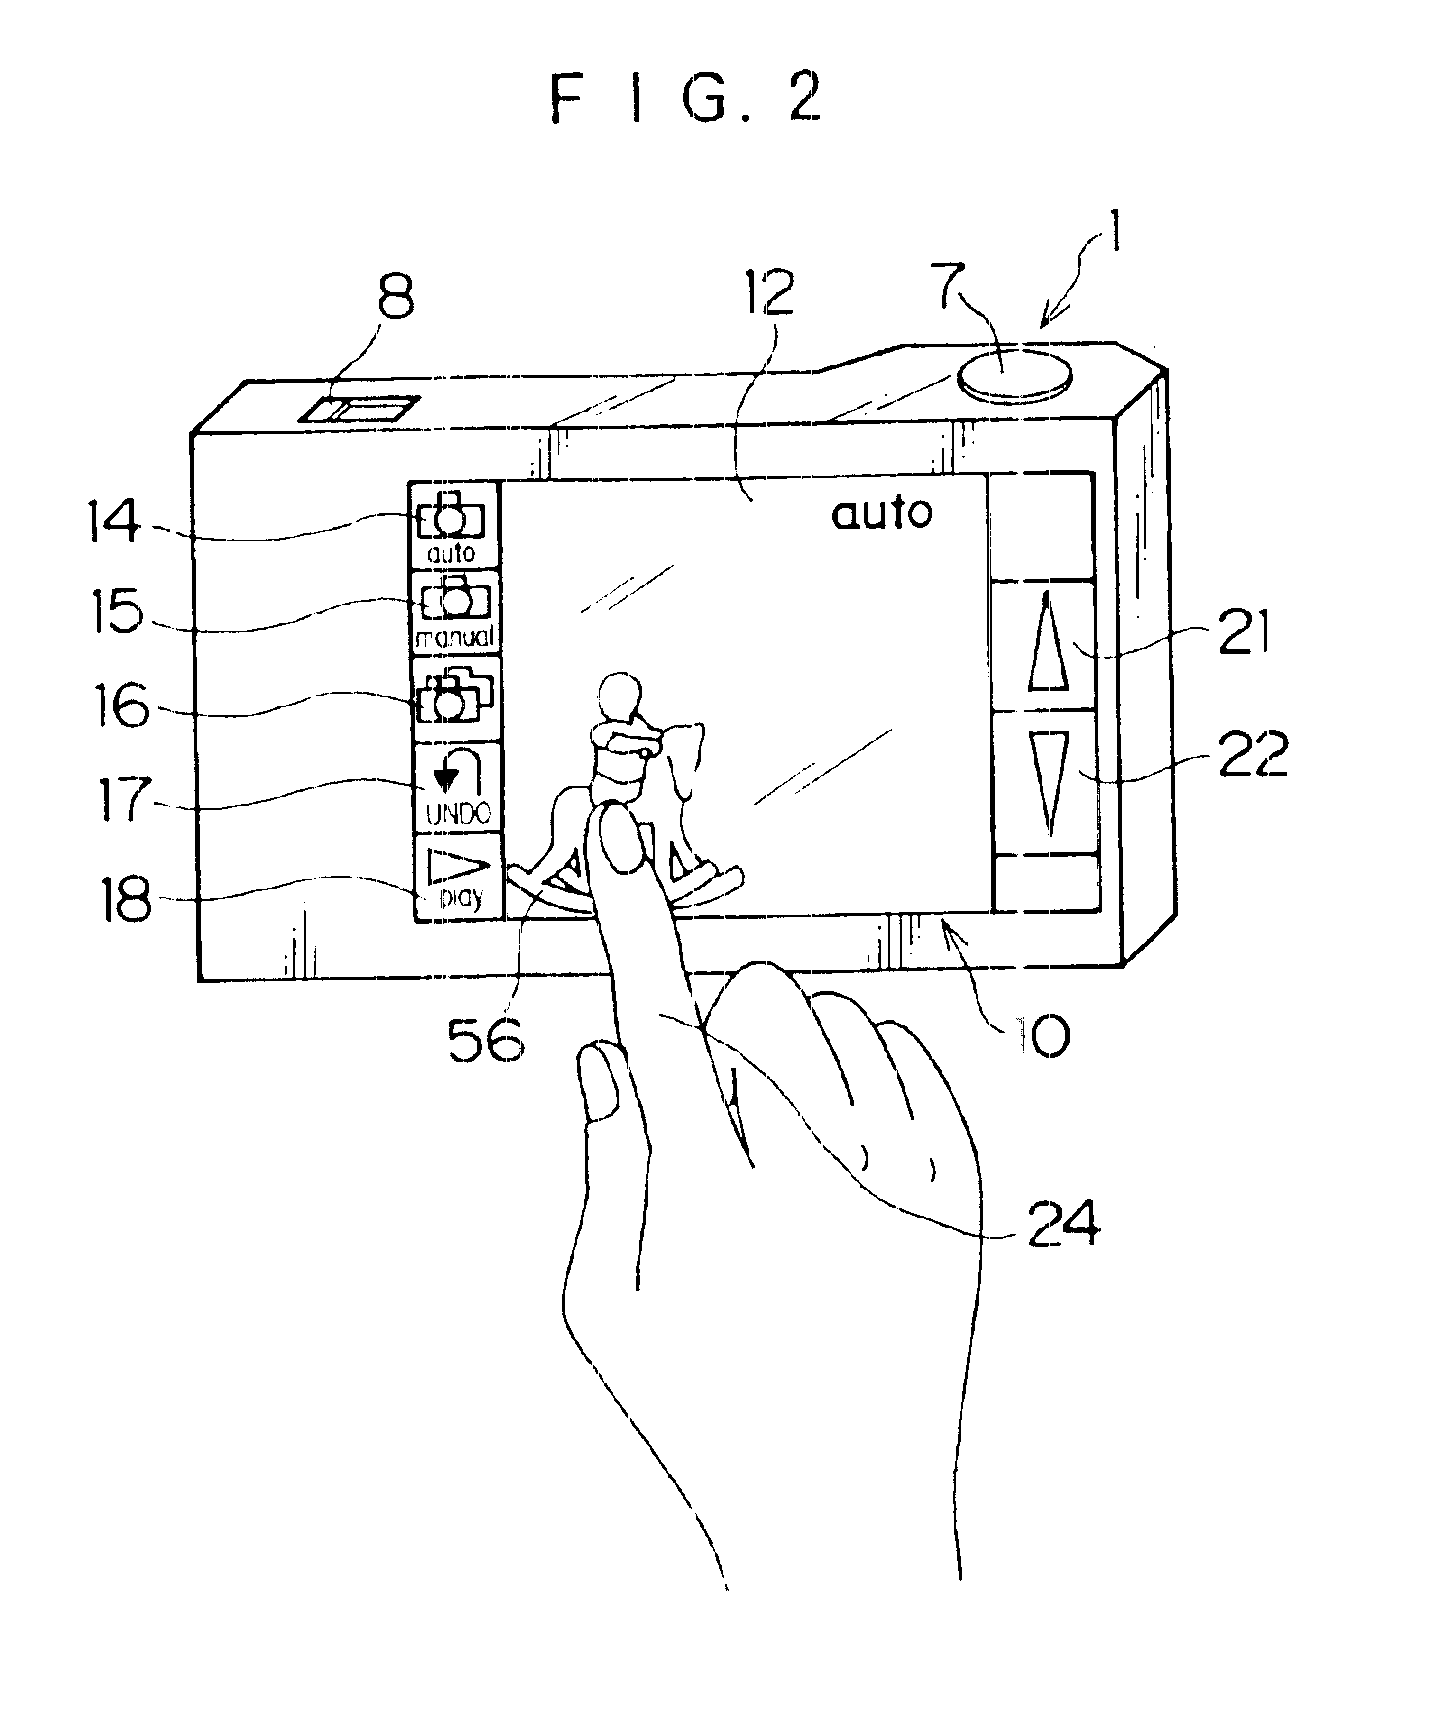 Camera with touchscreen